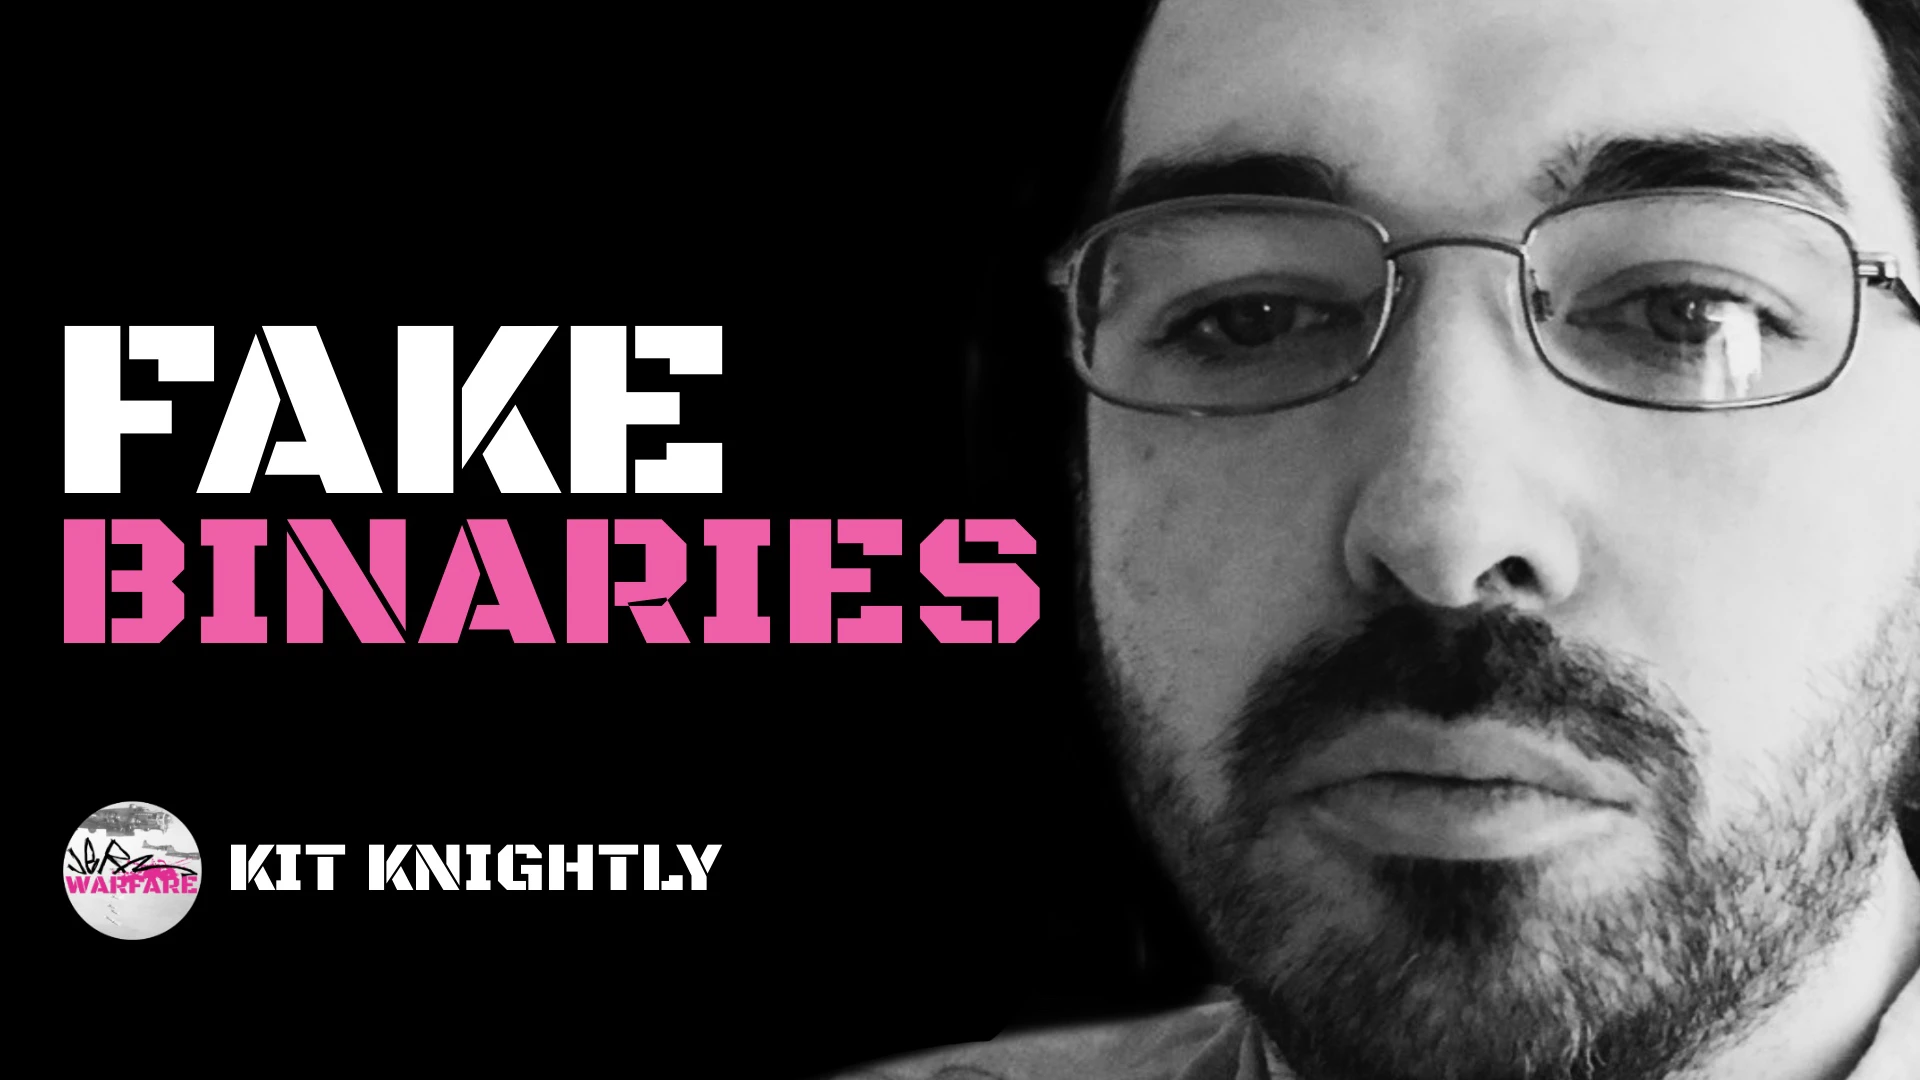 WATCH: Kit Knightly on fake binaries and great movies